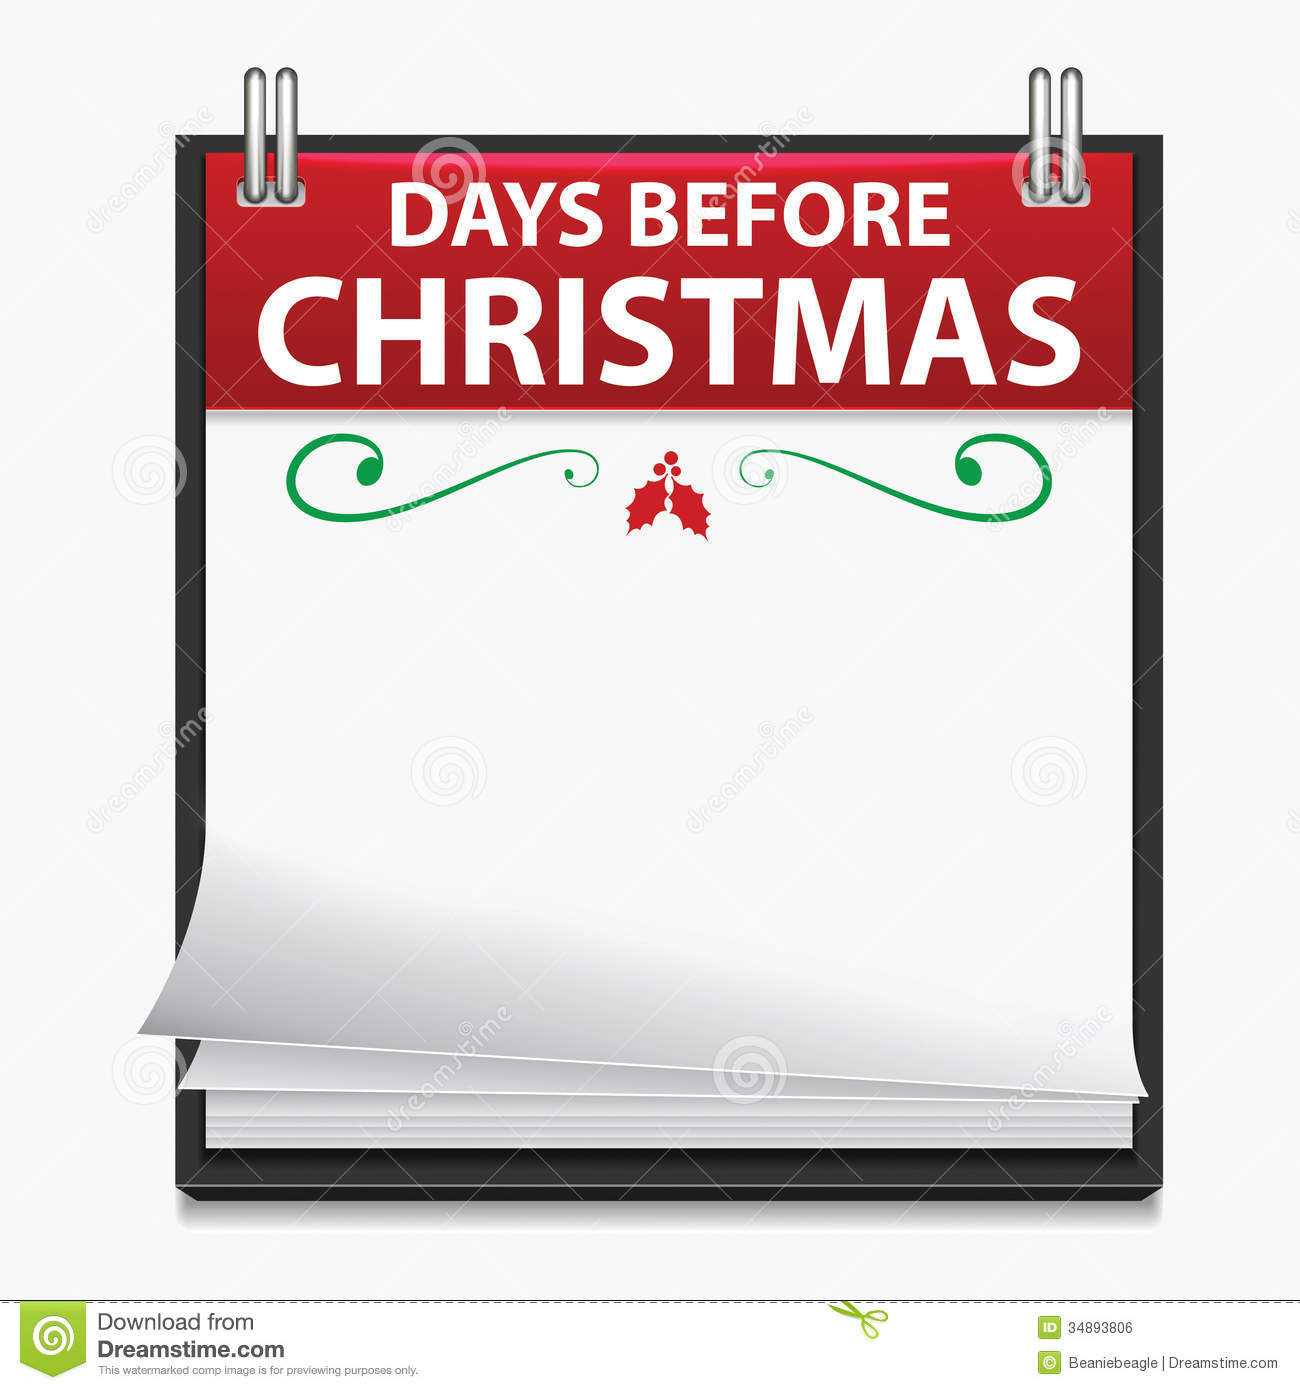 Blank Calendar Icon Used For Counting Down The Days Until Christmas